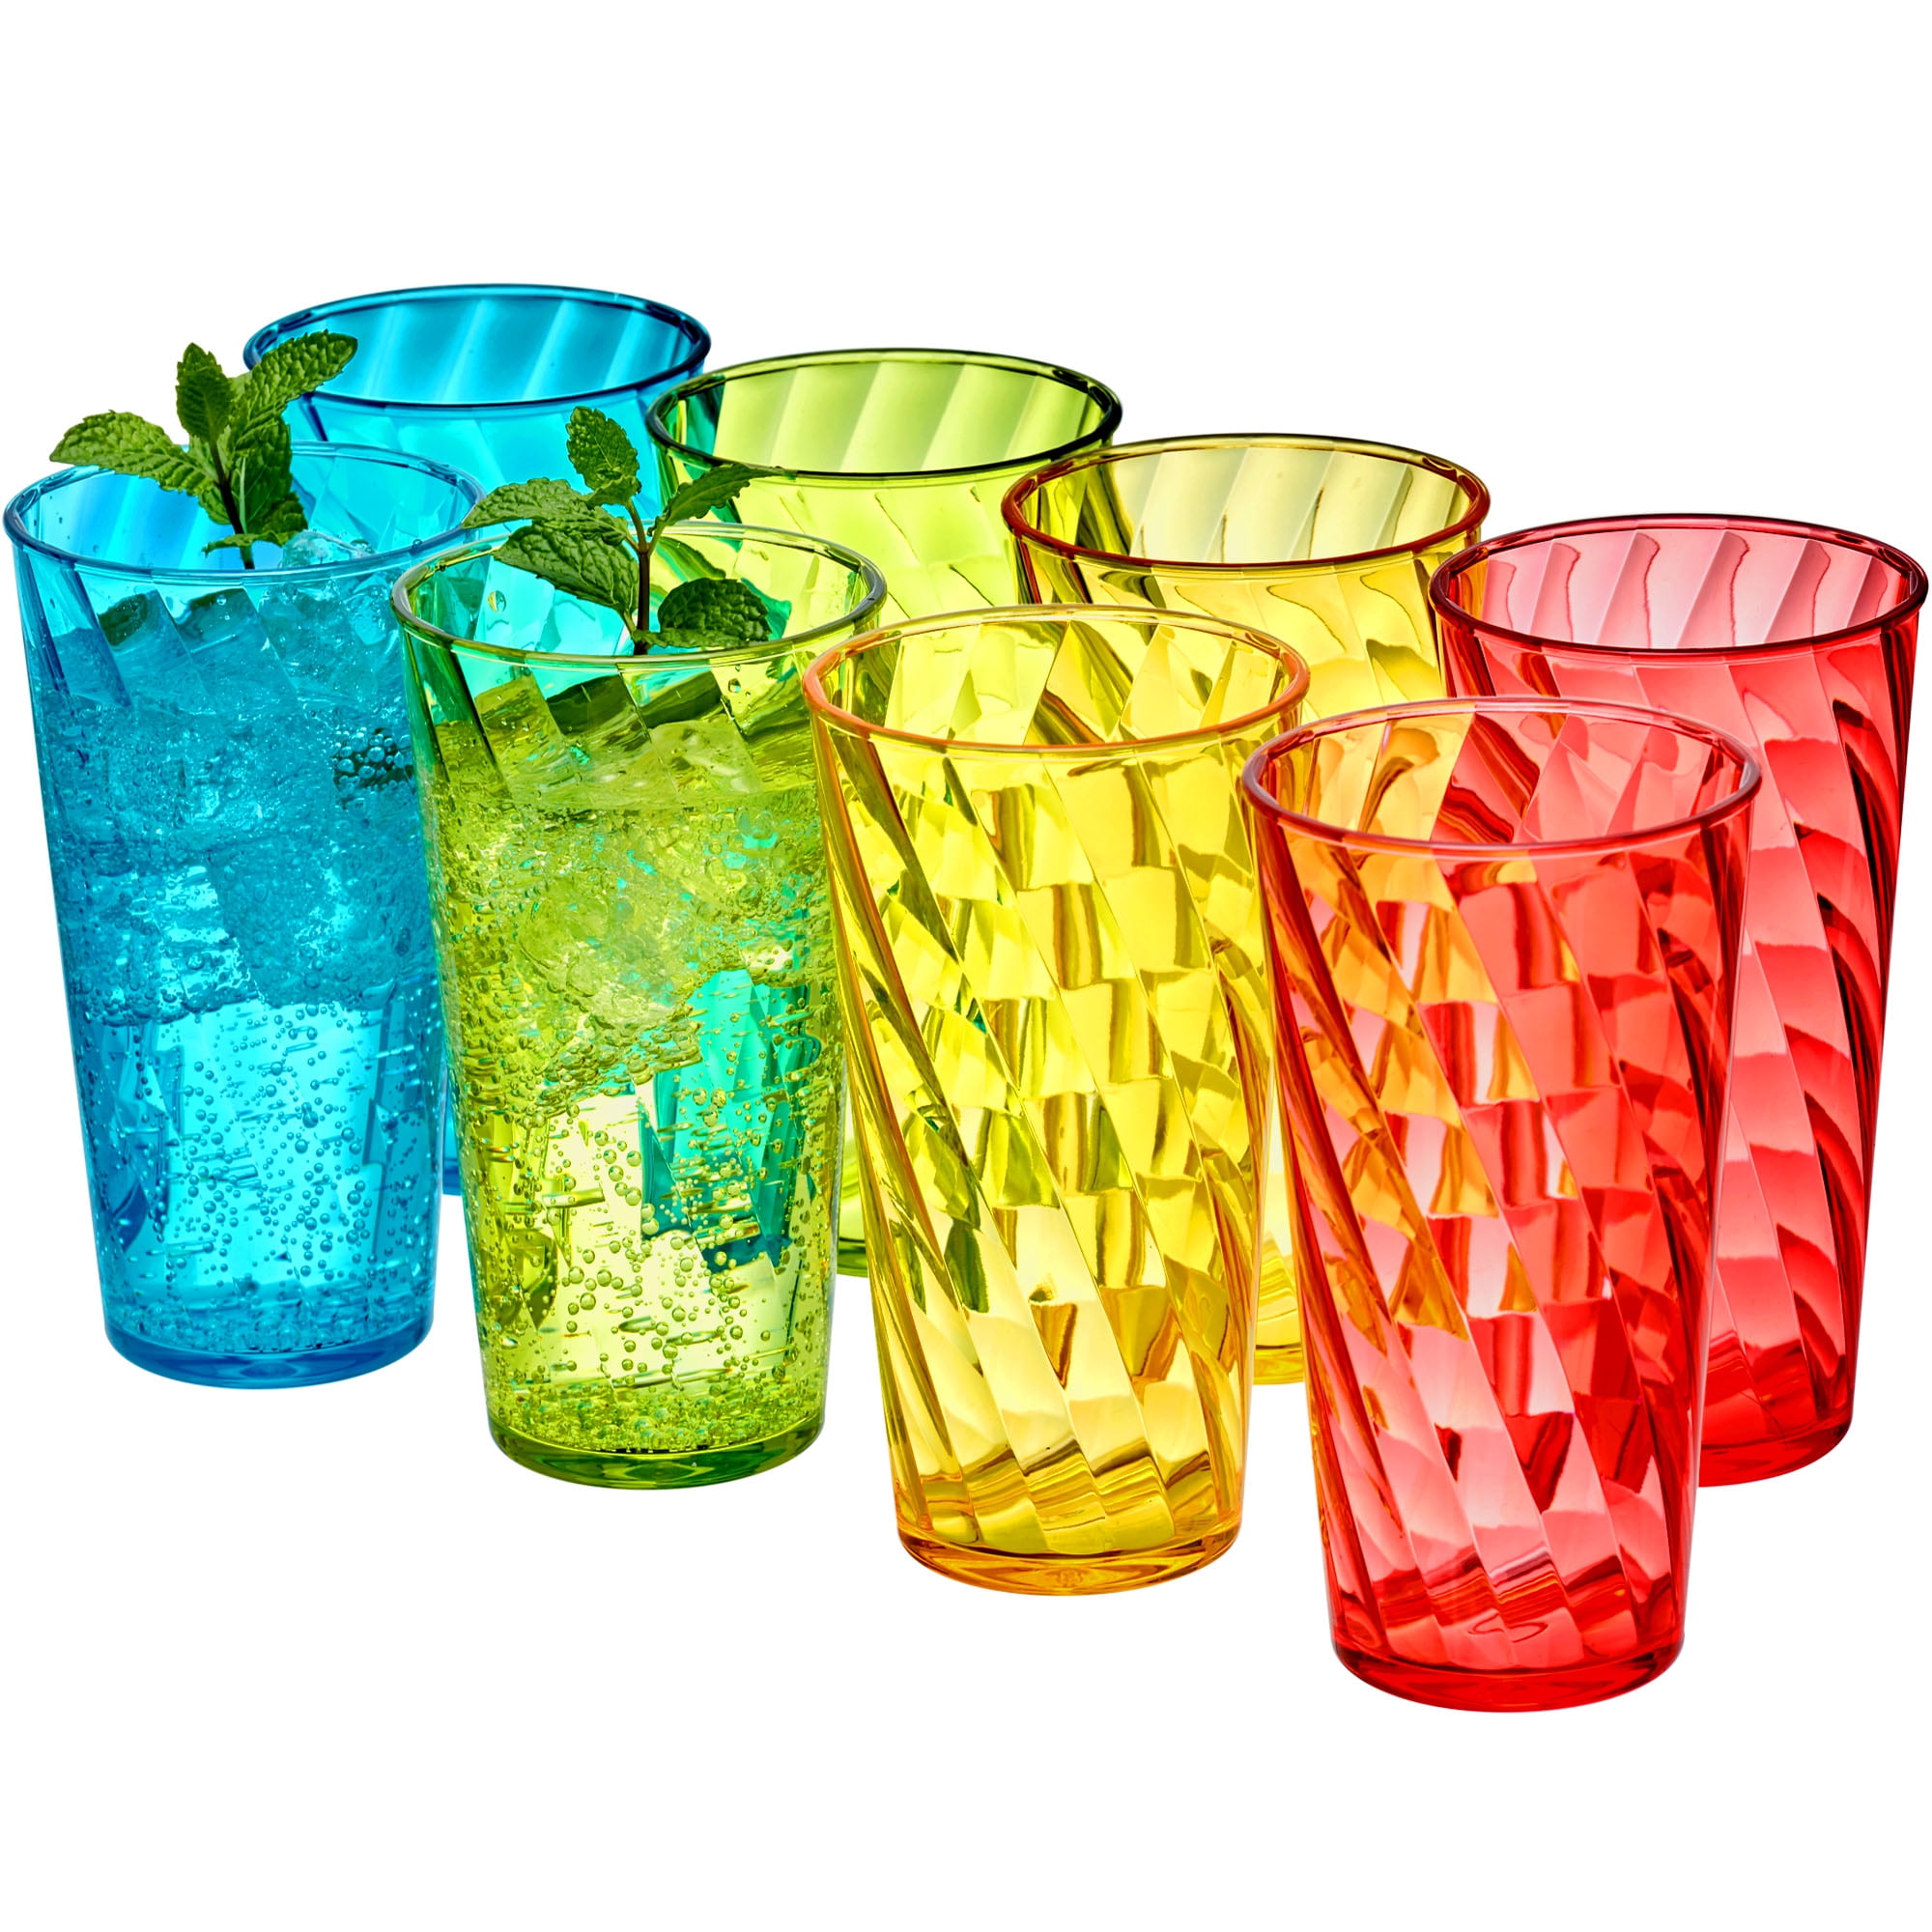 ALINK 20oz Drinking Glasses Set of 4, Can Shaped Mint Julep Glass Cups,  Iced Tea Ice Coffee Glasses,…See more ALINK 20oz Drinking Glasses Set of 4